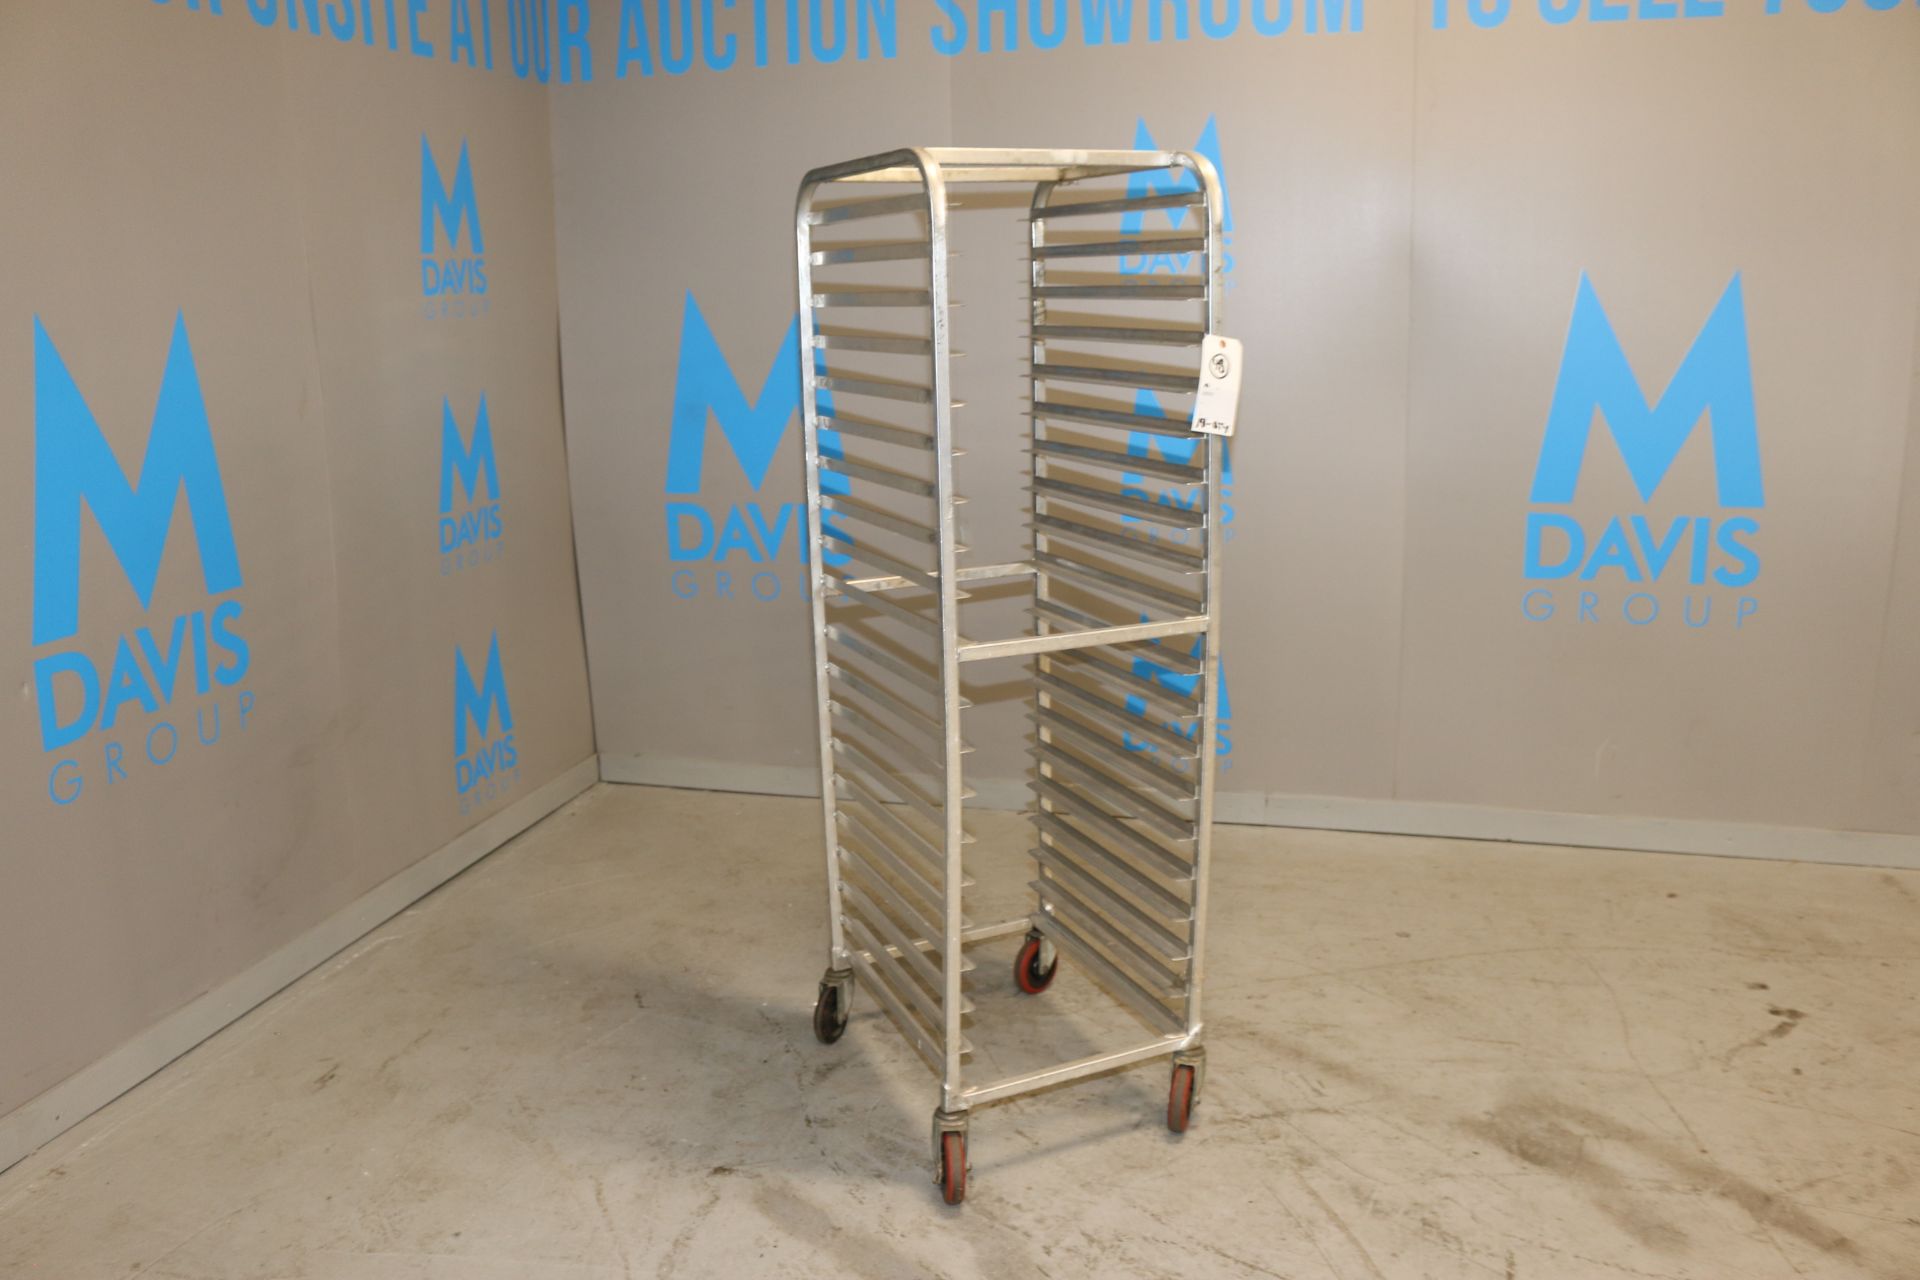 Aluminum Bakery Racks, Holds 18" W x 25" L Trays (IN#68903)(LOCATED AT M. DAVIS GROUP AUCTION